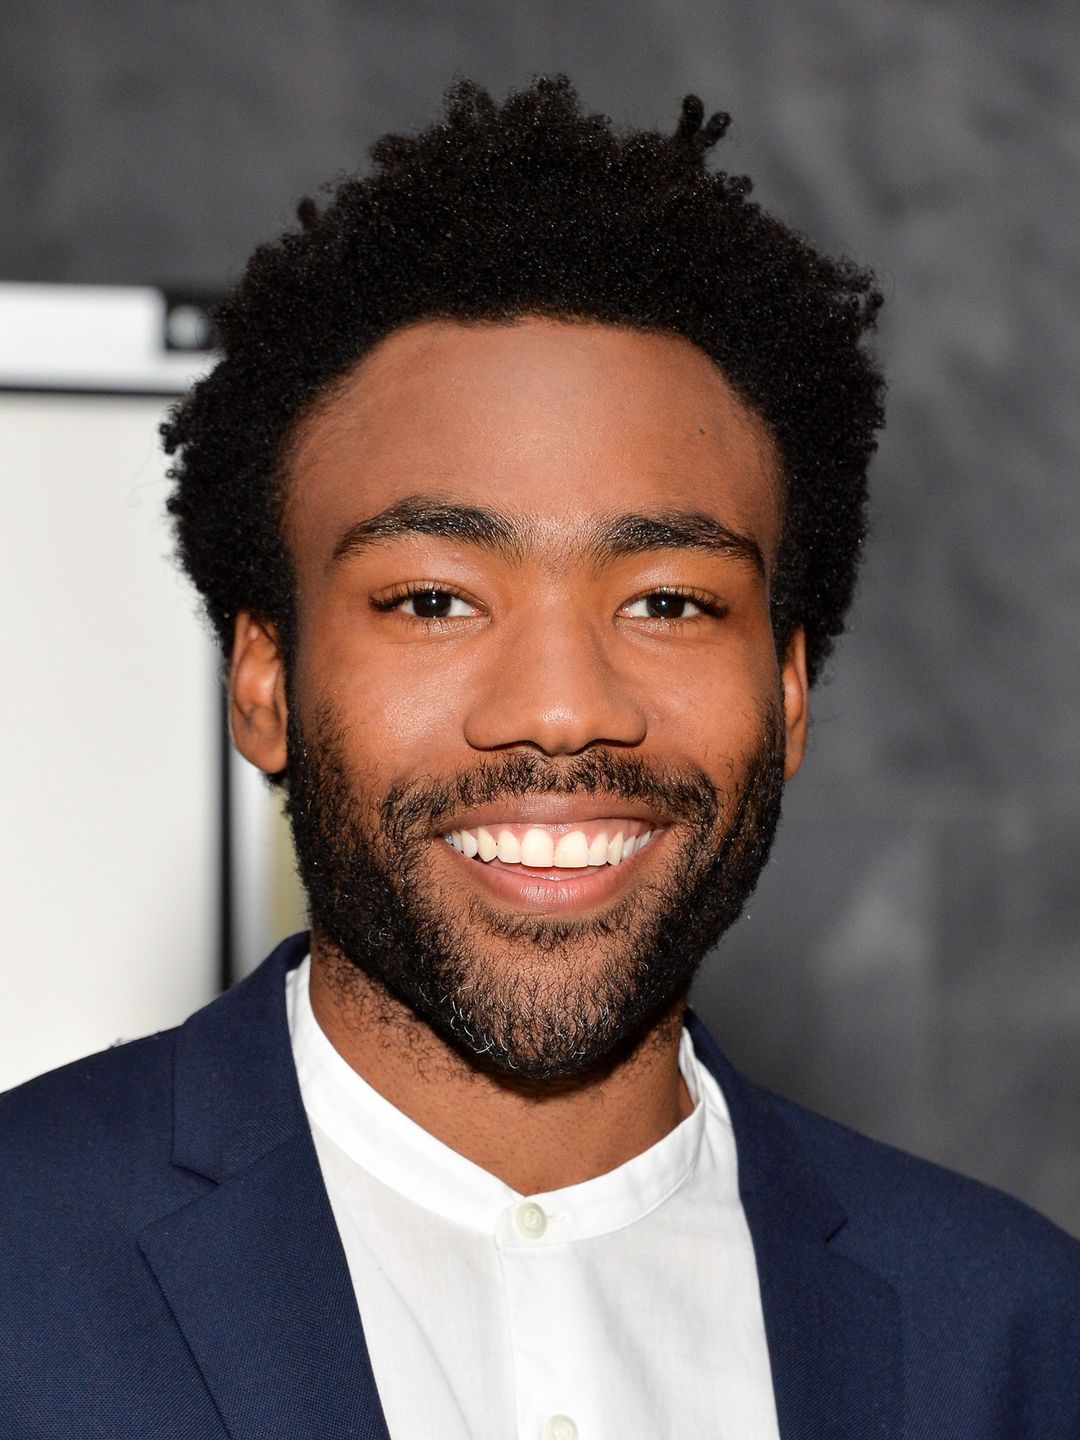 Donald Glover education